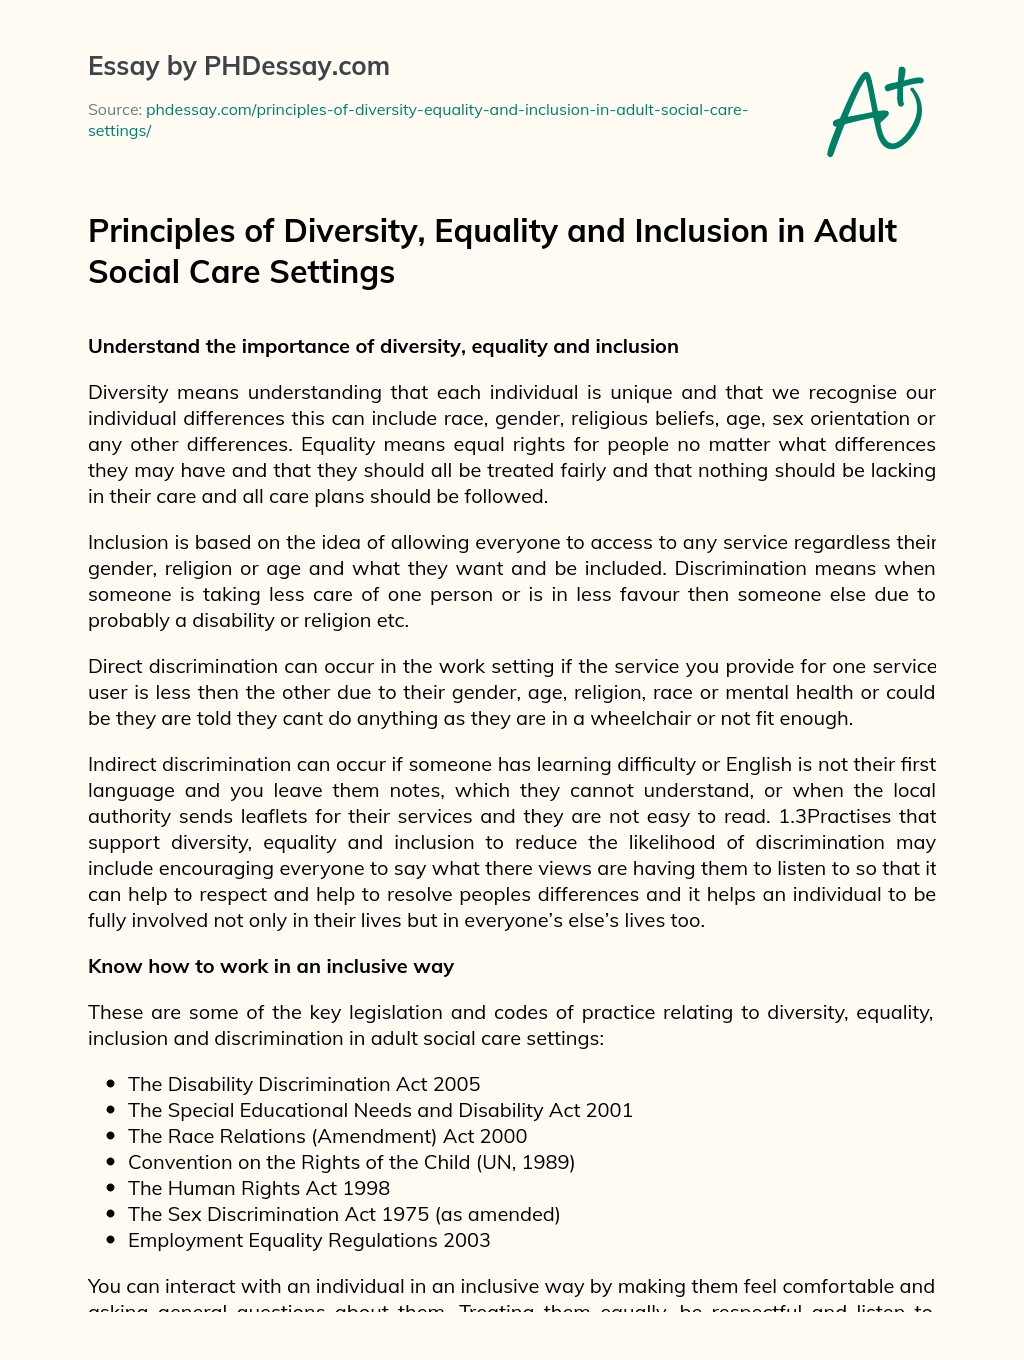 Principles of Diversity, Equality and Inclusion in Adult Social Care Settings essay